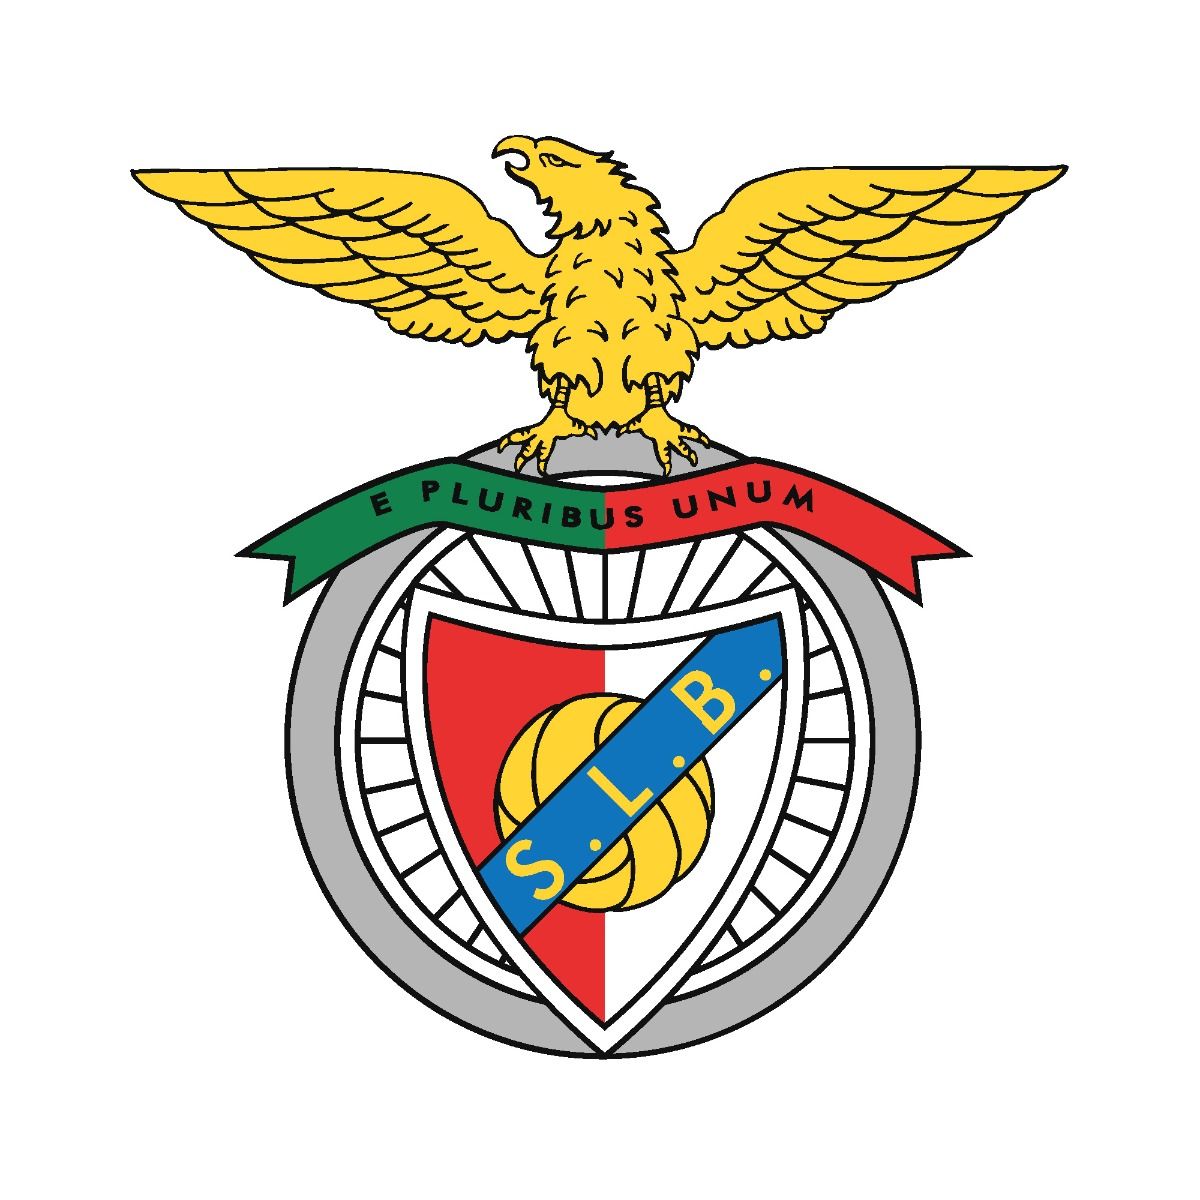 Soccer Wall Decals - Primeira Liga - Portugal Soccer Team Logos - SL  Benfica - Promotional Products - Custom Gifts - Party Favors - Corporate  Gifts - Personalized Gifts